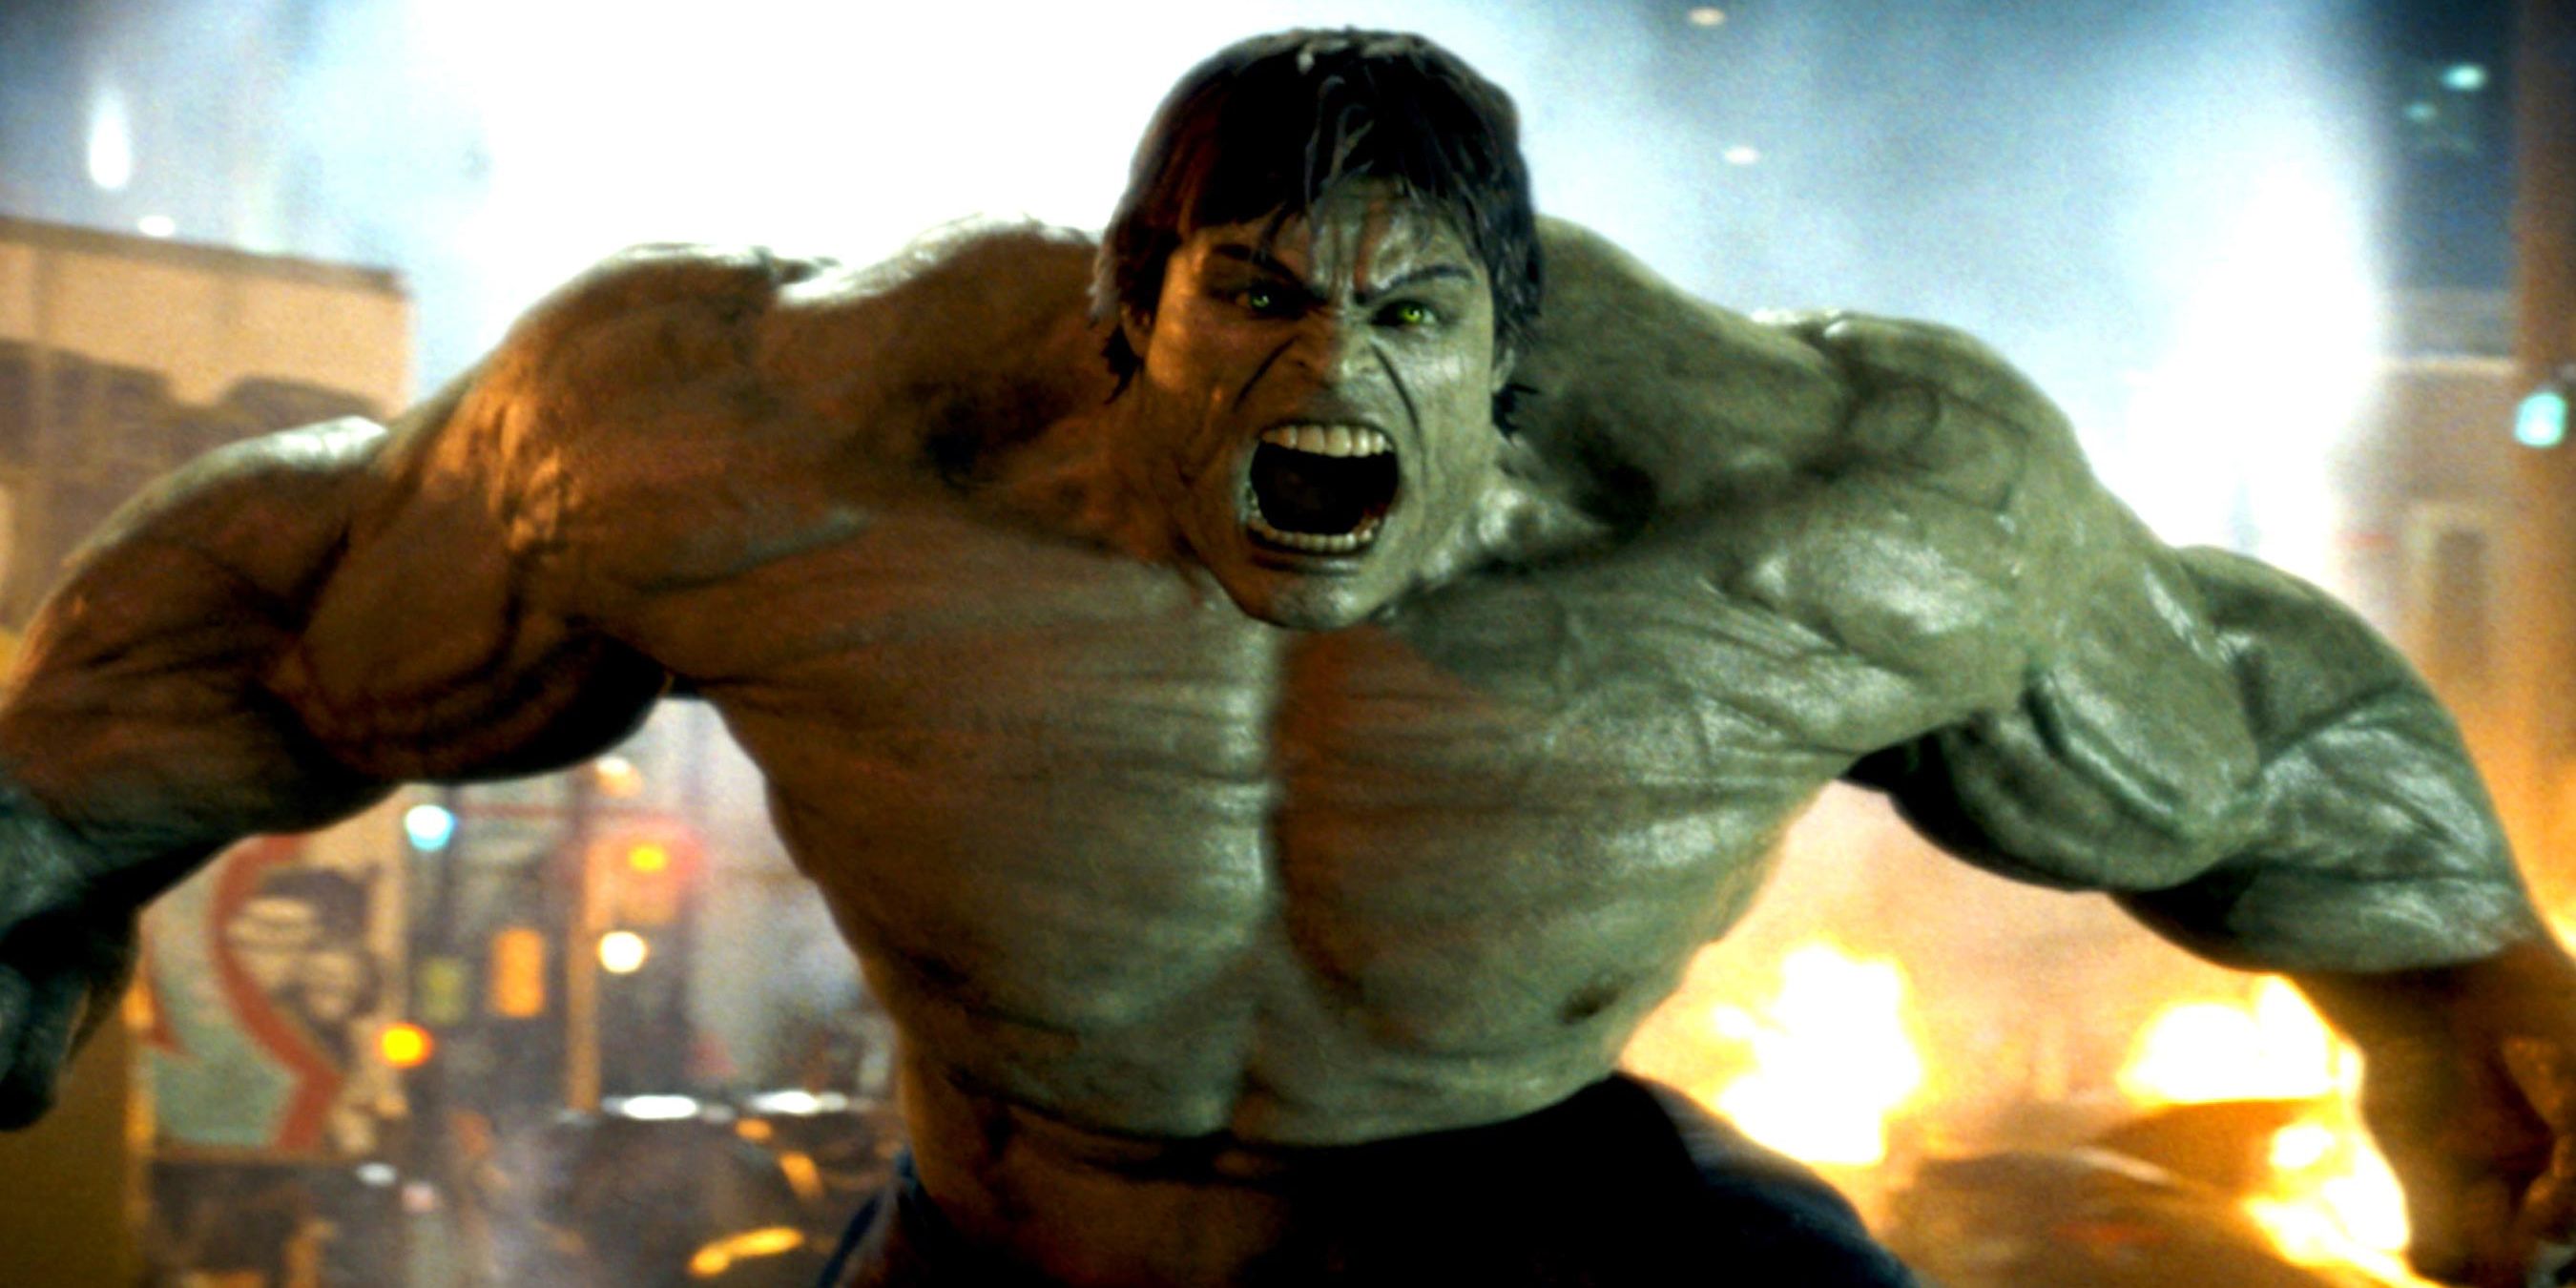 The Hulk standing with arms spread out, yelling in anger